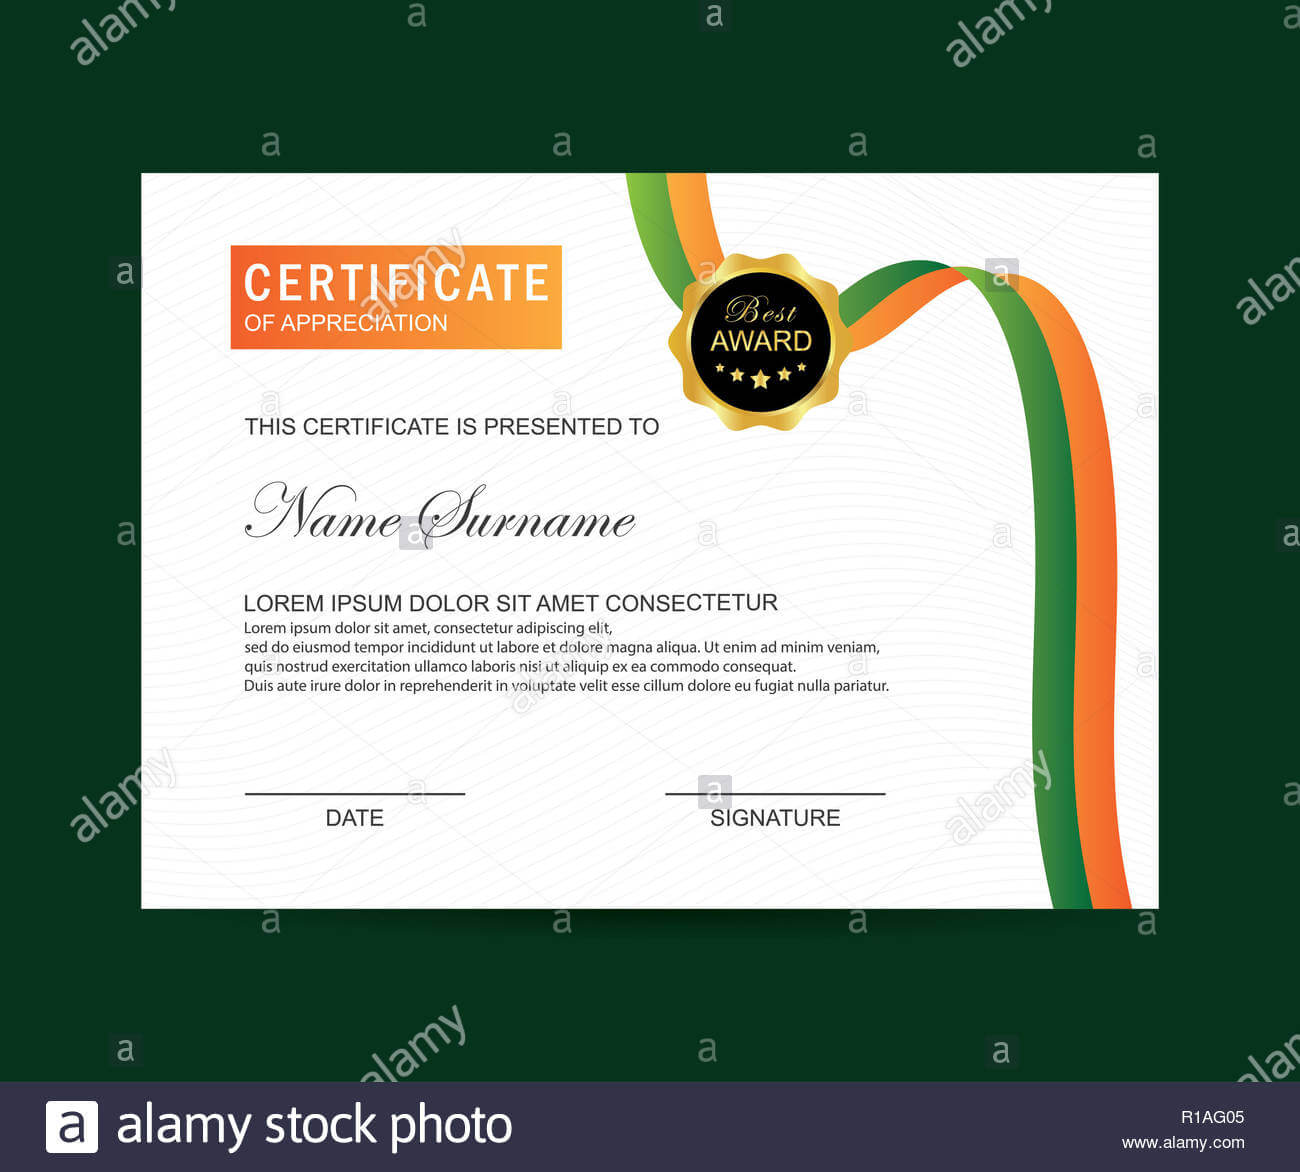 Modern Certificate Template And Background Stock Photo For Borderless Certificate Templates